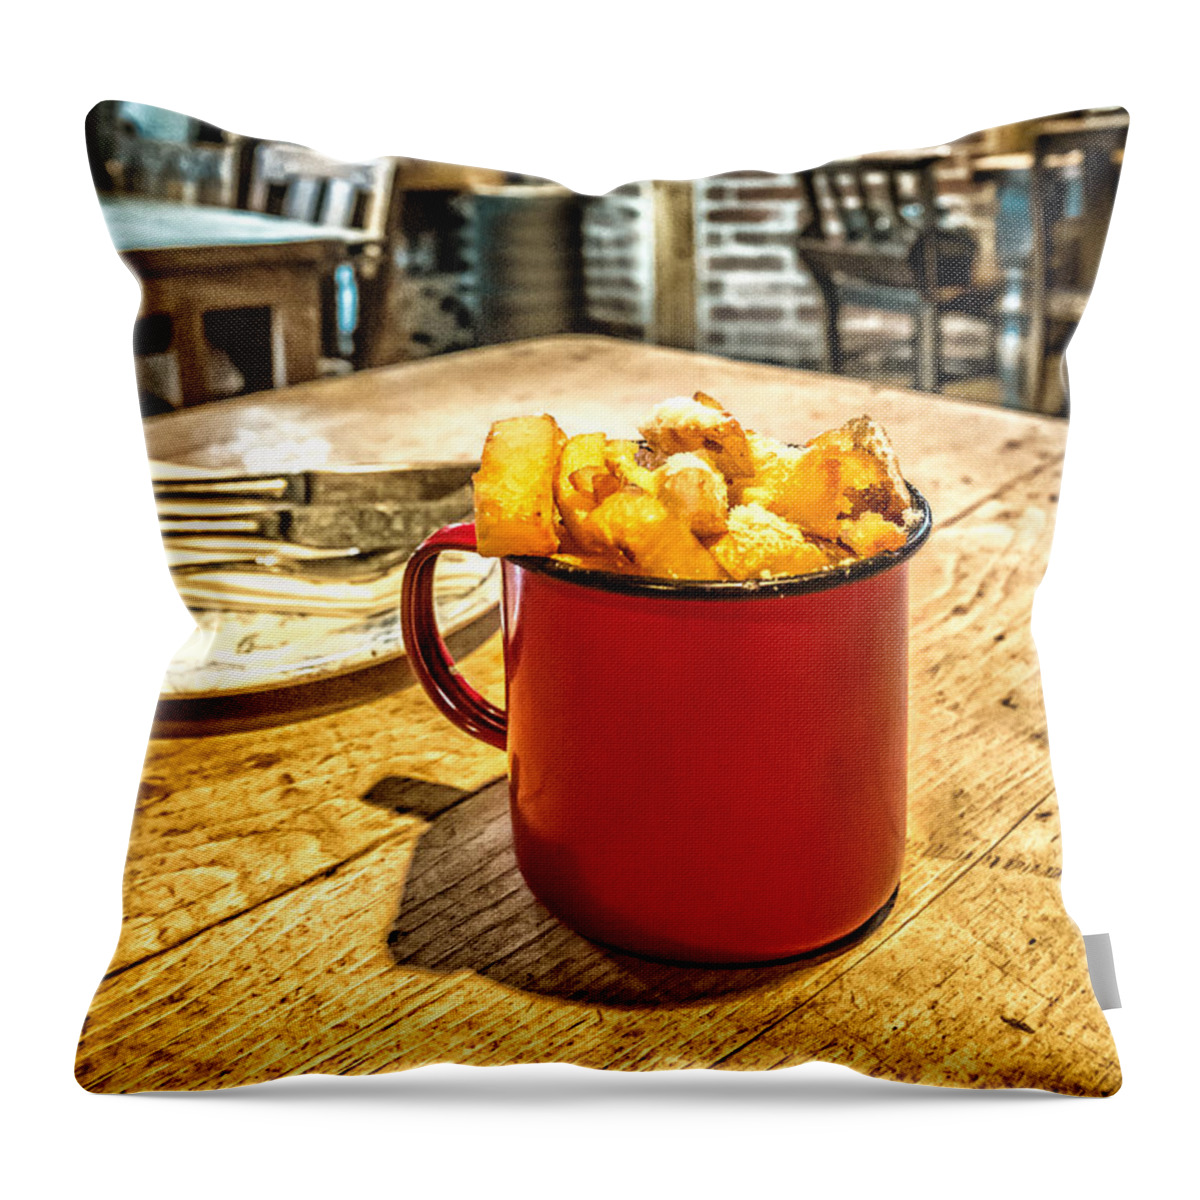 Fries Throw Pillow featuring the photograph Posh Fries by Nick Bywater